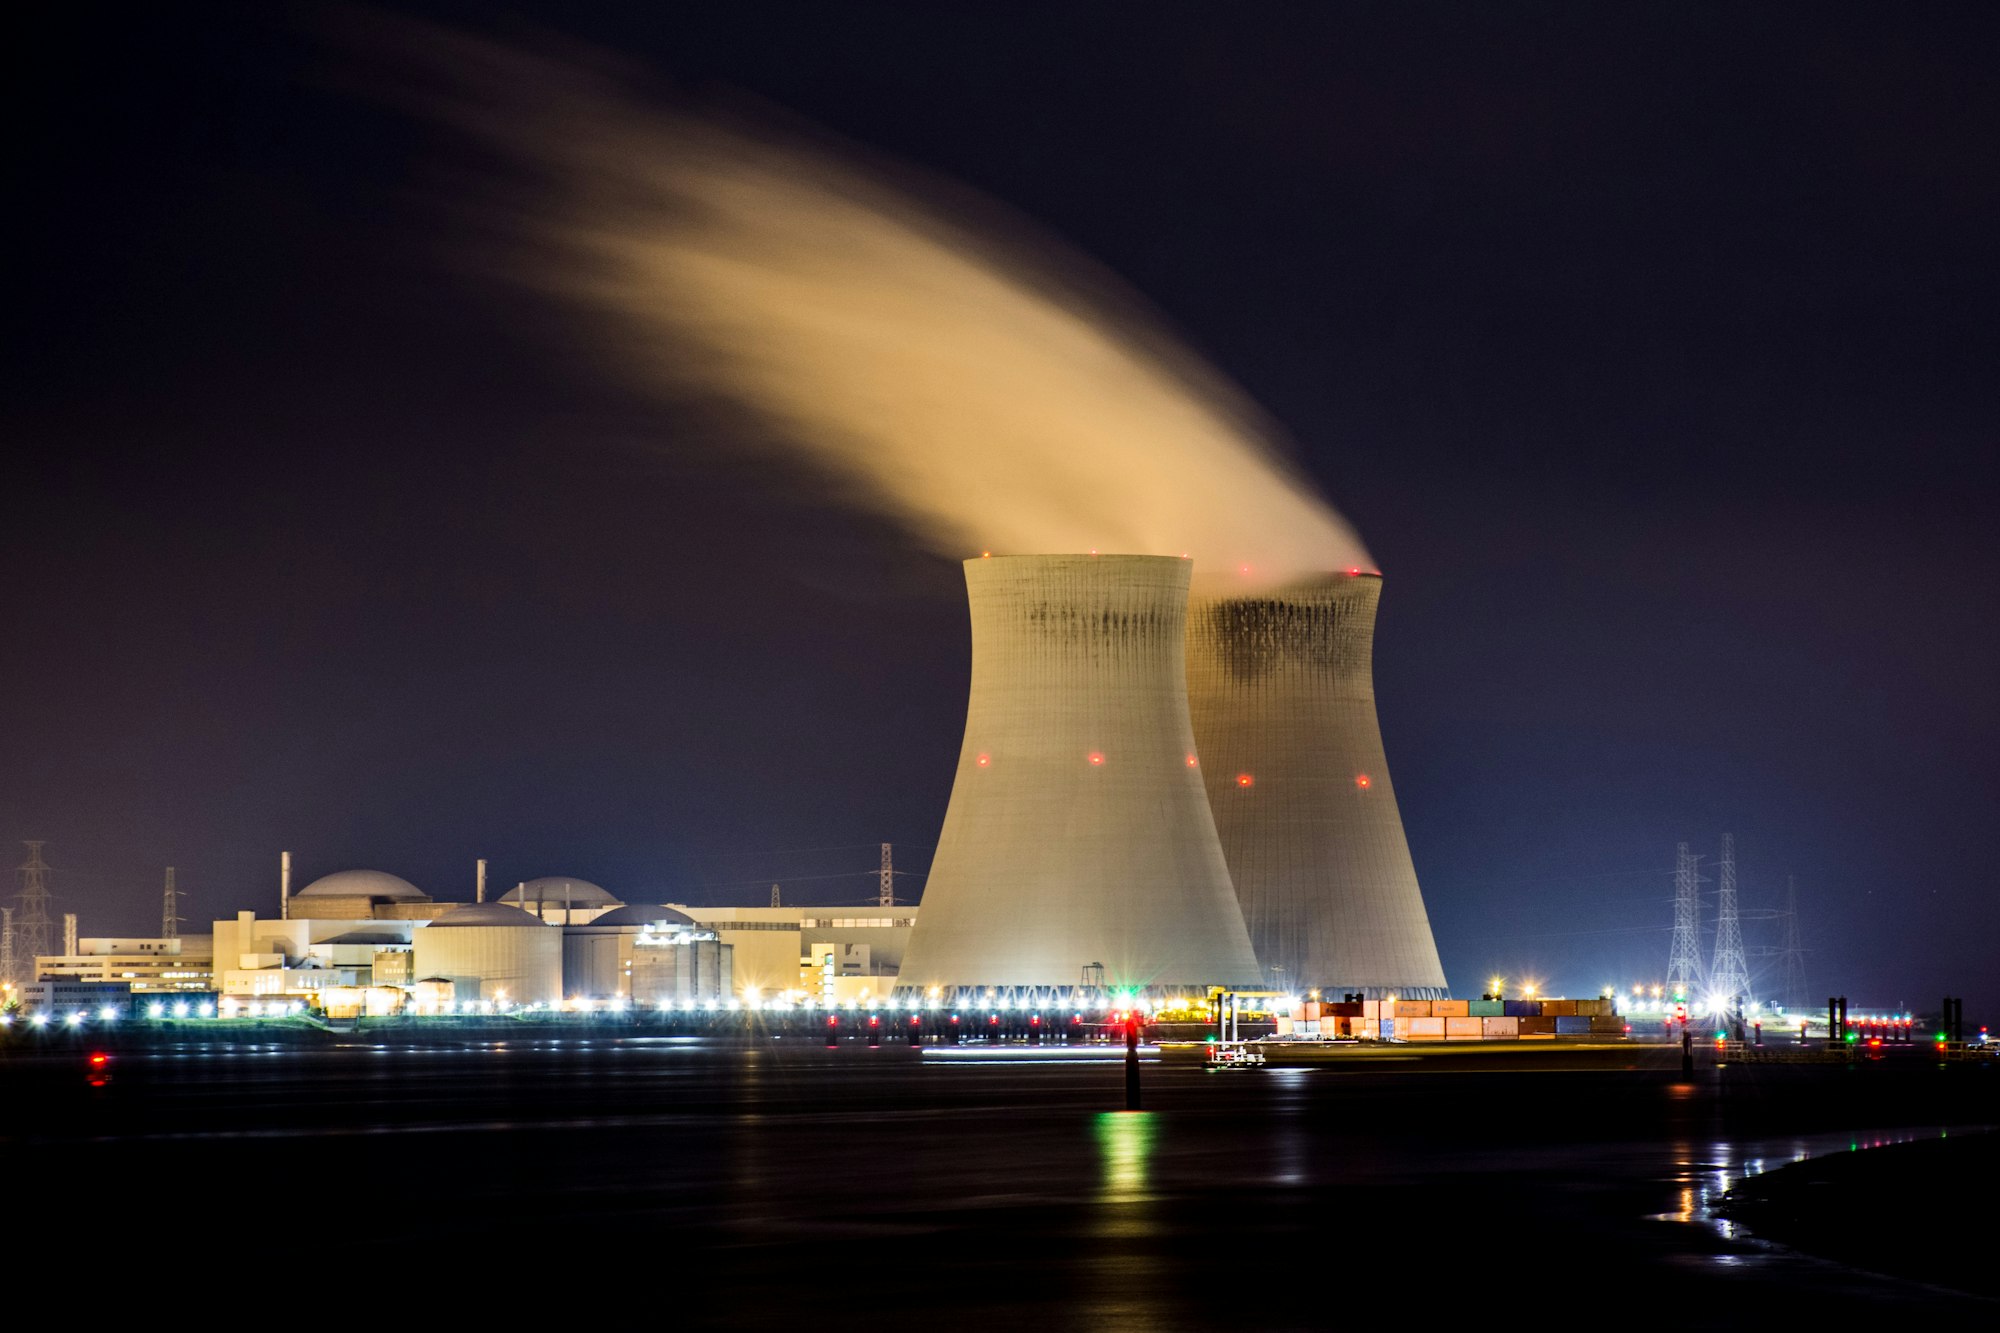 Nuclear energy is infrastructure